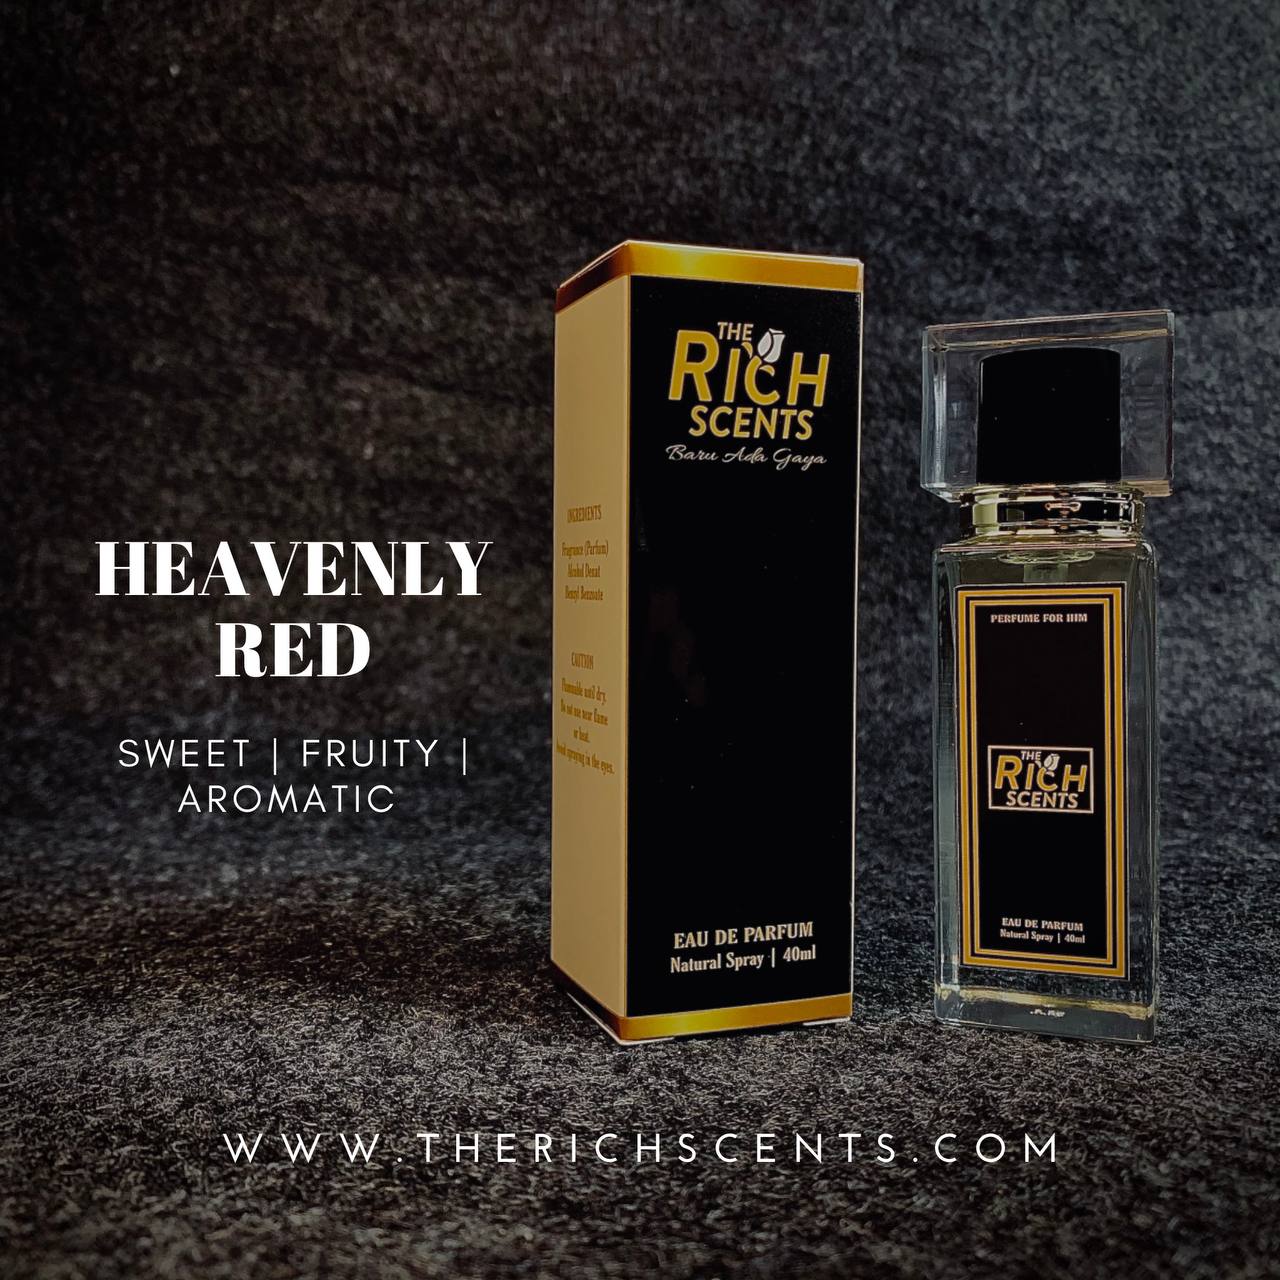 HEAVENLY RED